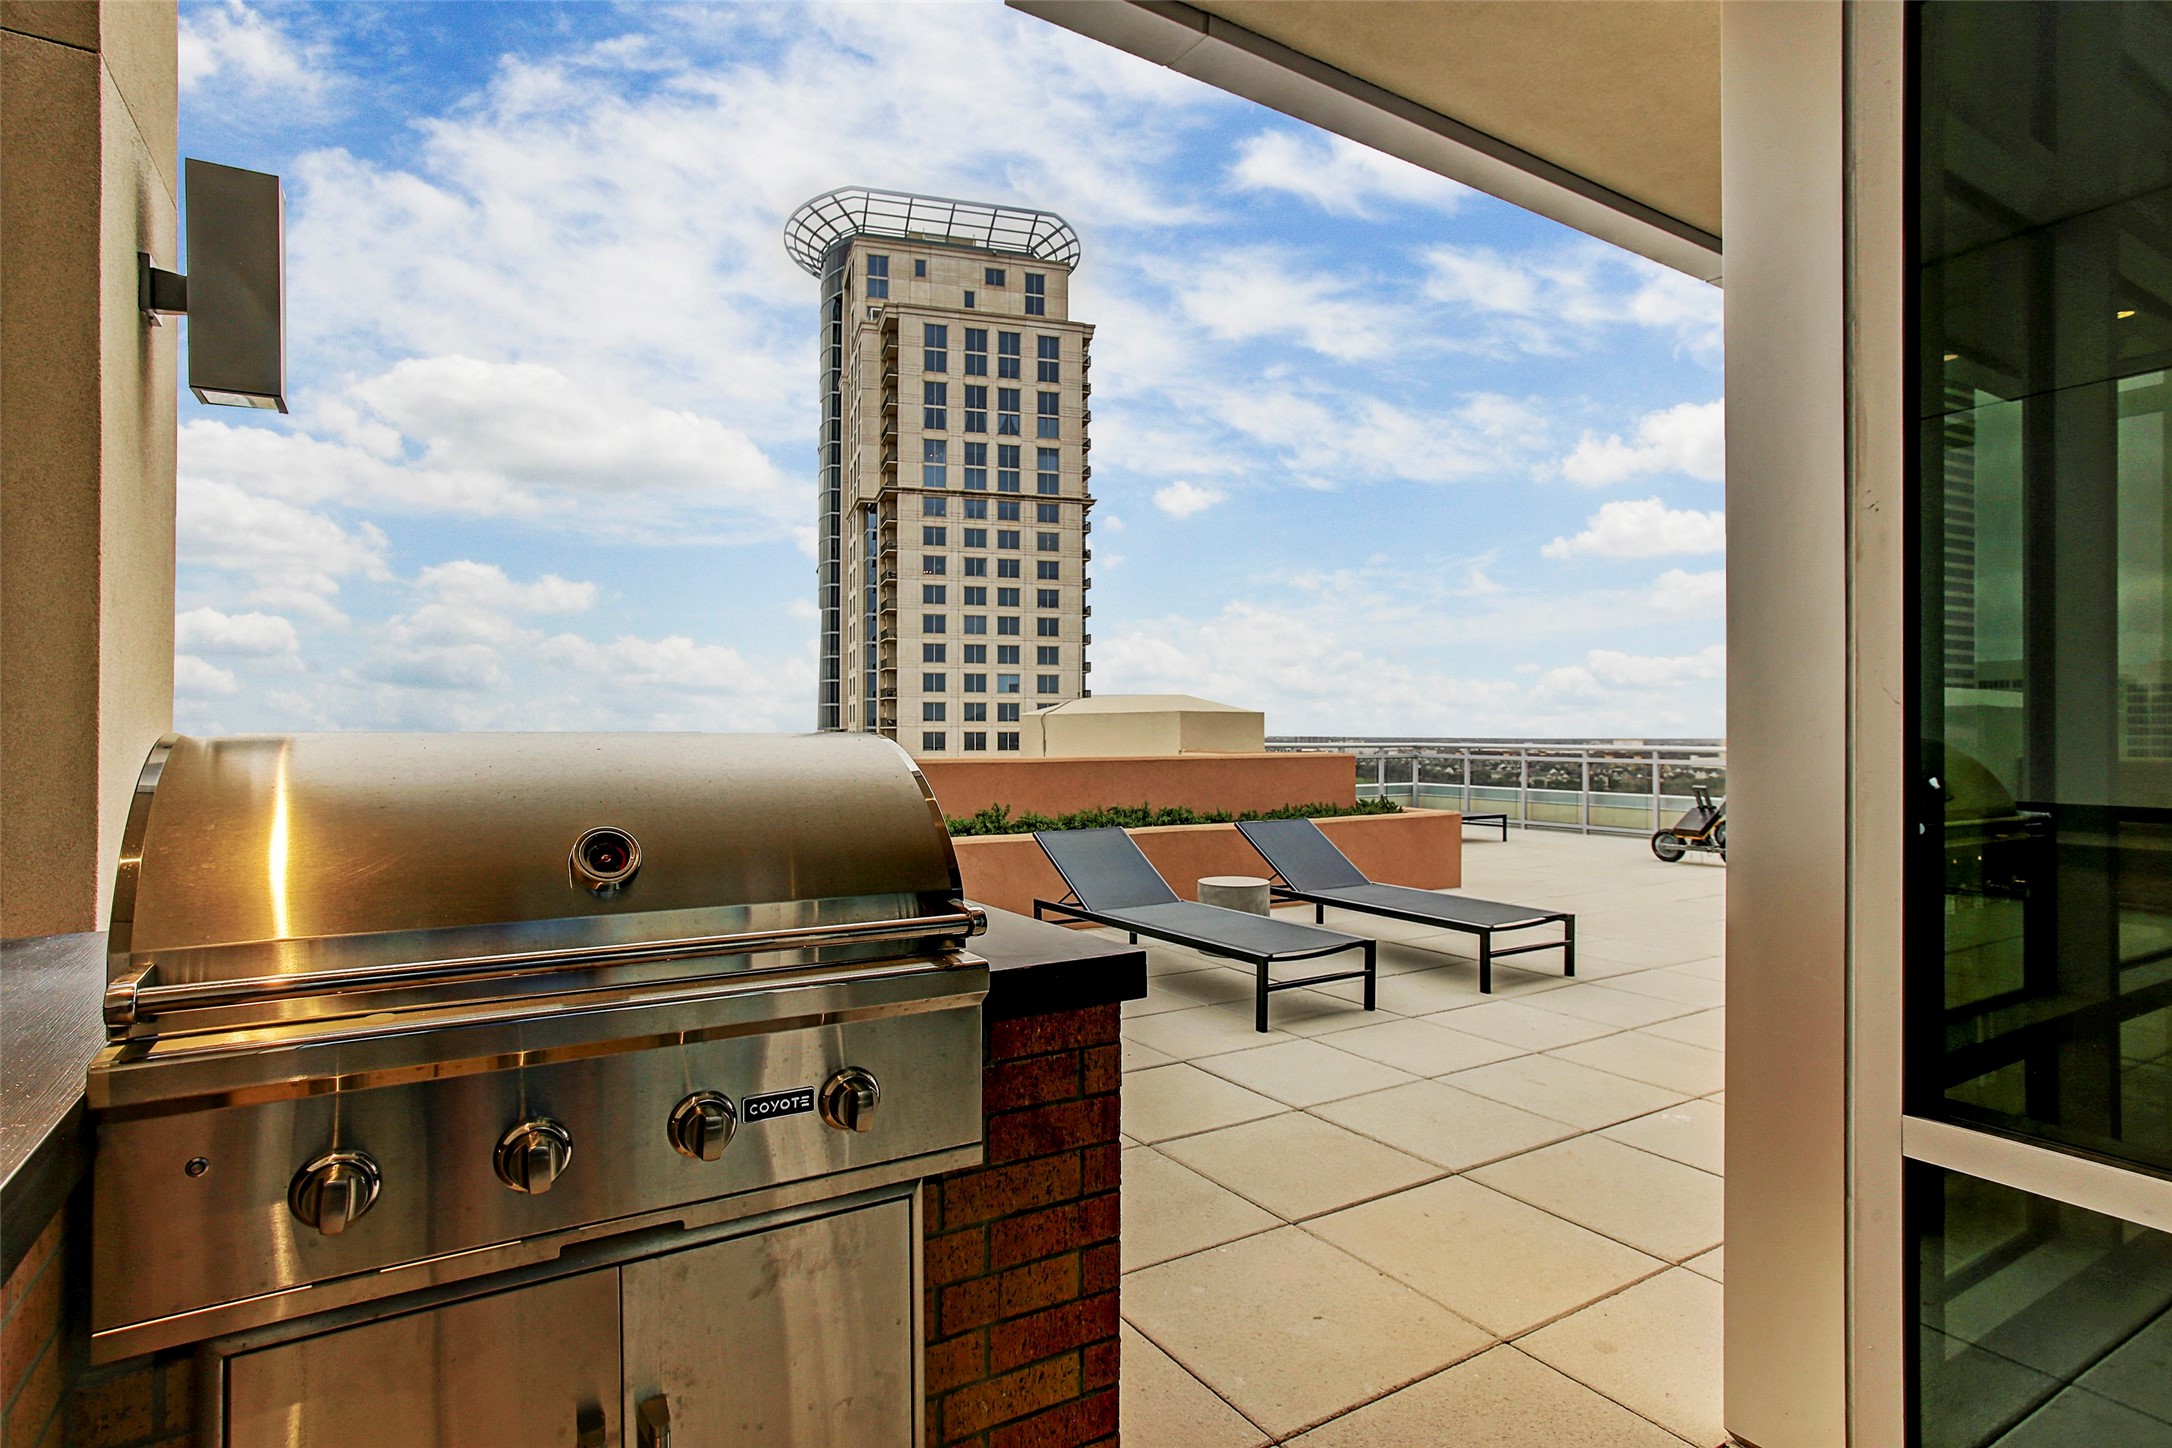 Also located on the top floor is the grill for easy entertaining and cooking.